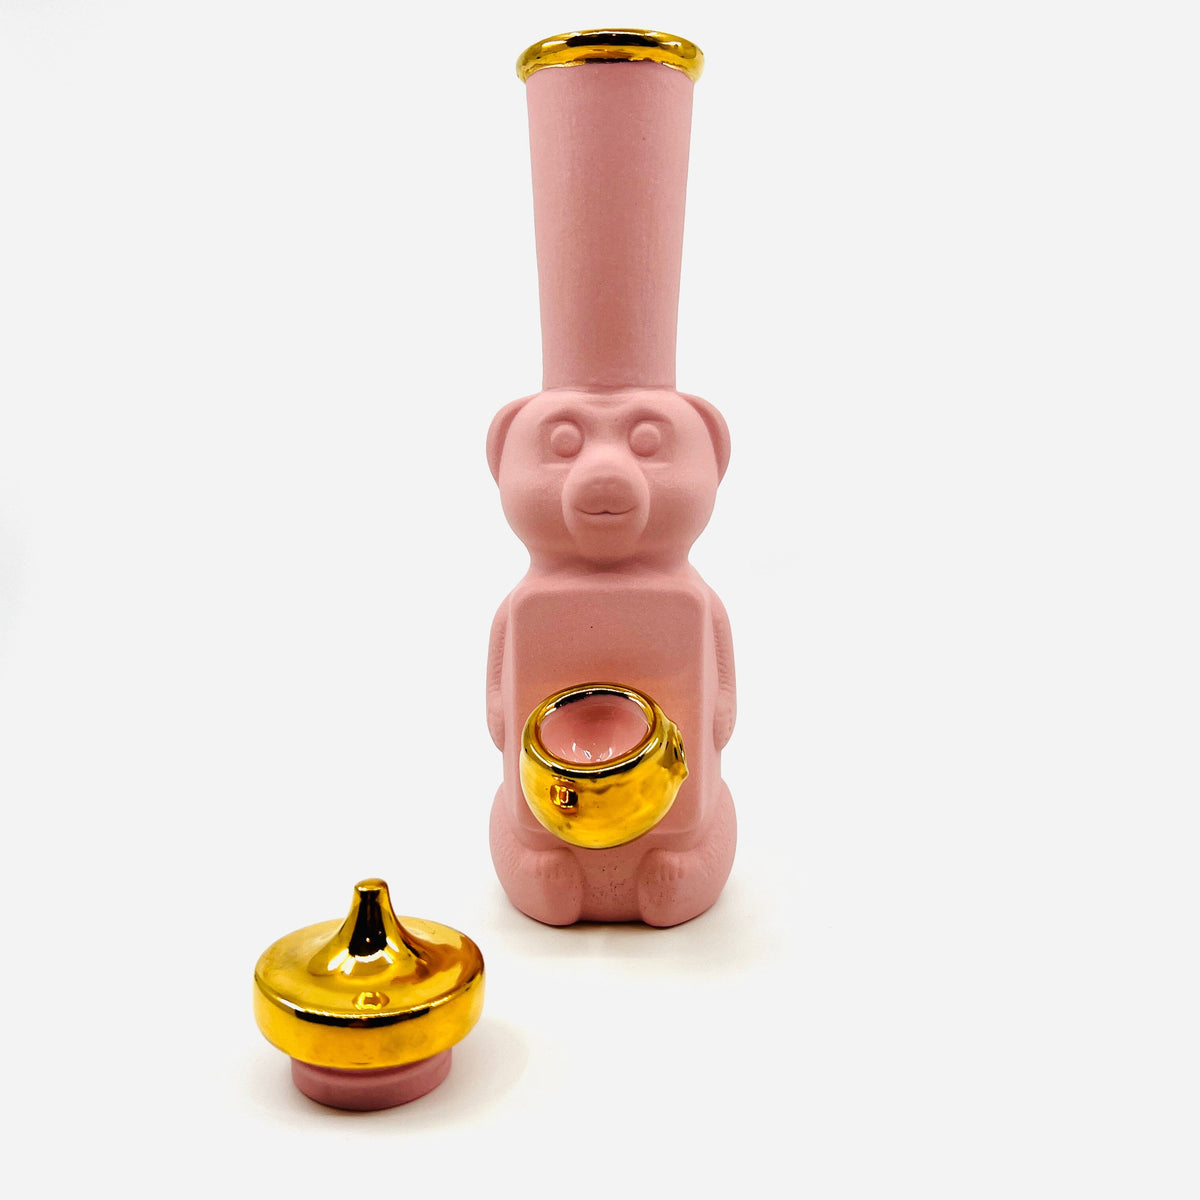 22k Gold Honey Bear Pipe Decor Candy Relics Pink 